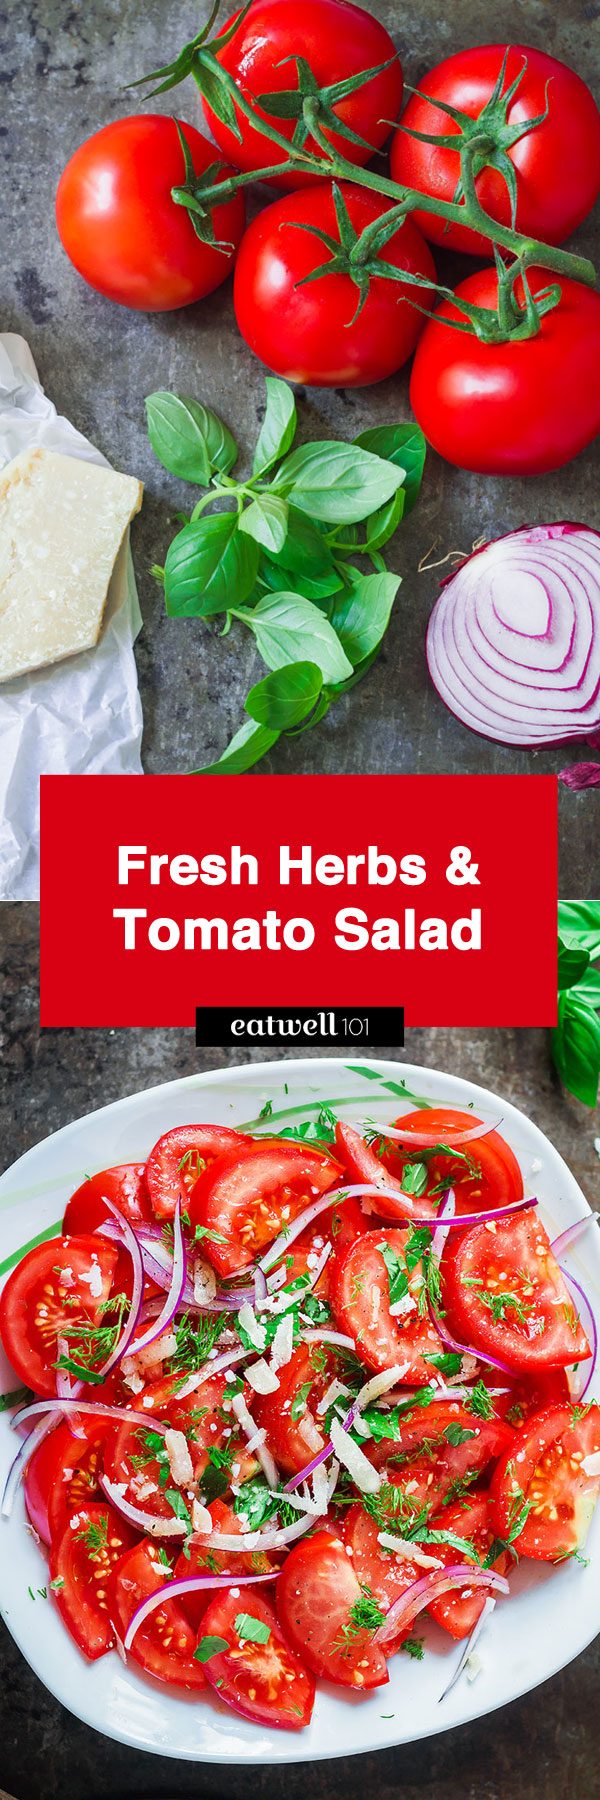 Tomato Salad Recipe — Loaded with fresh herbs and takes 10 mins of prep. Simple yet packed with flavor!